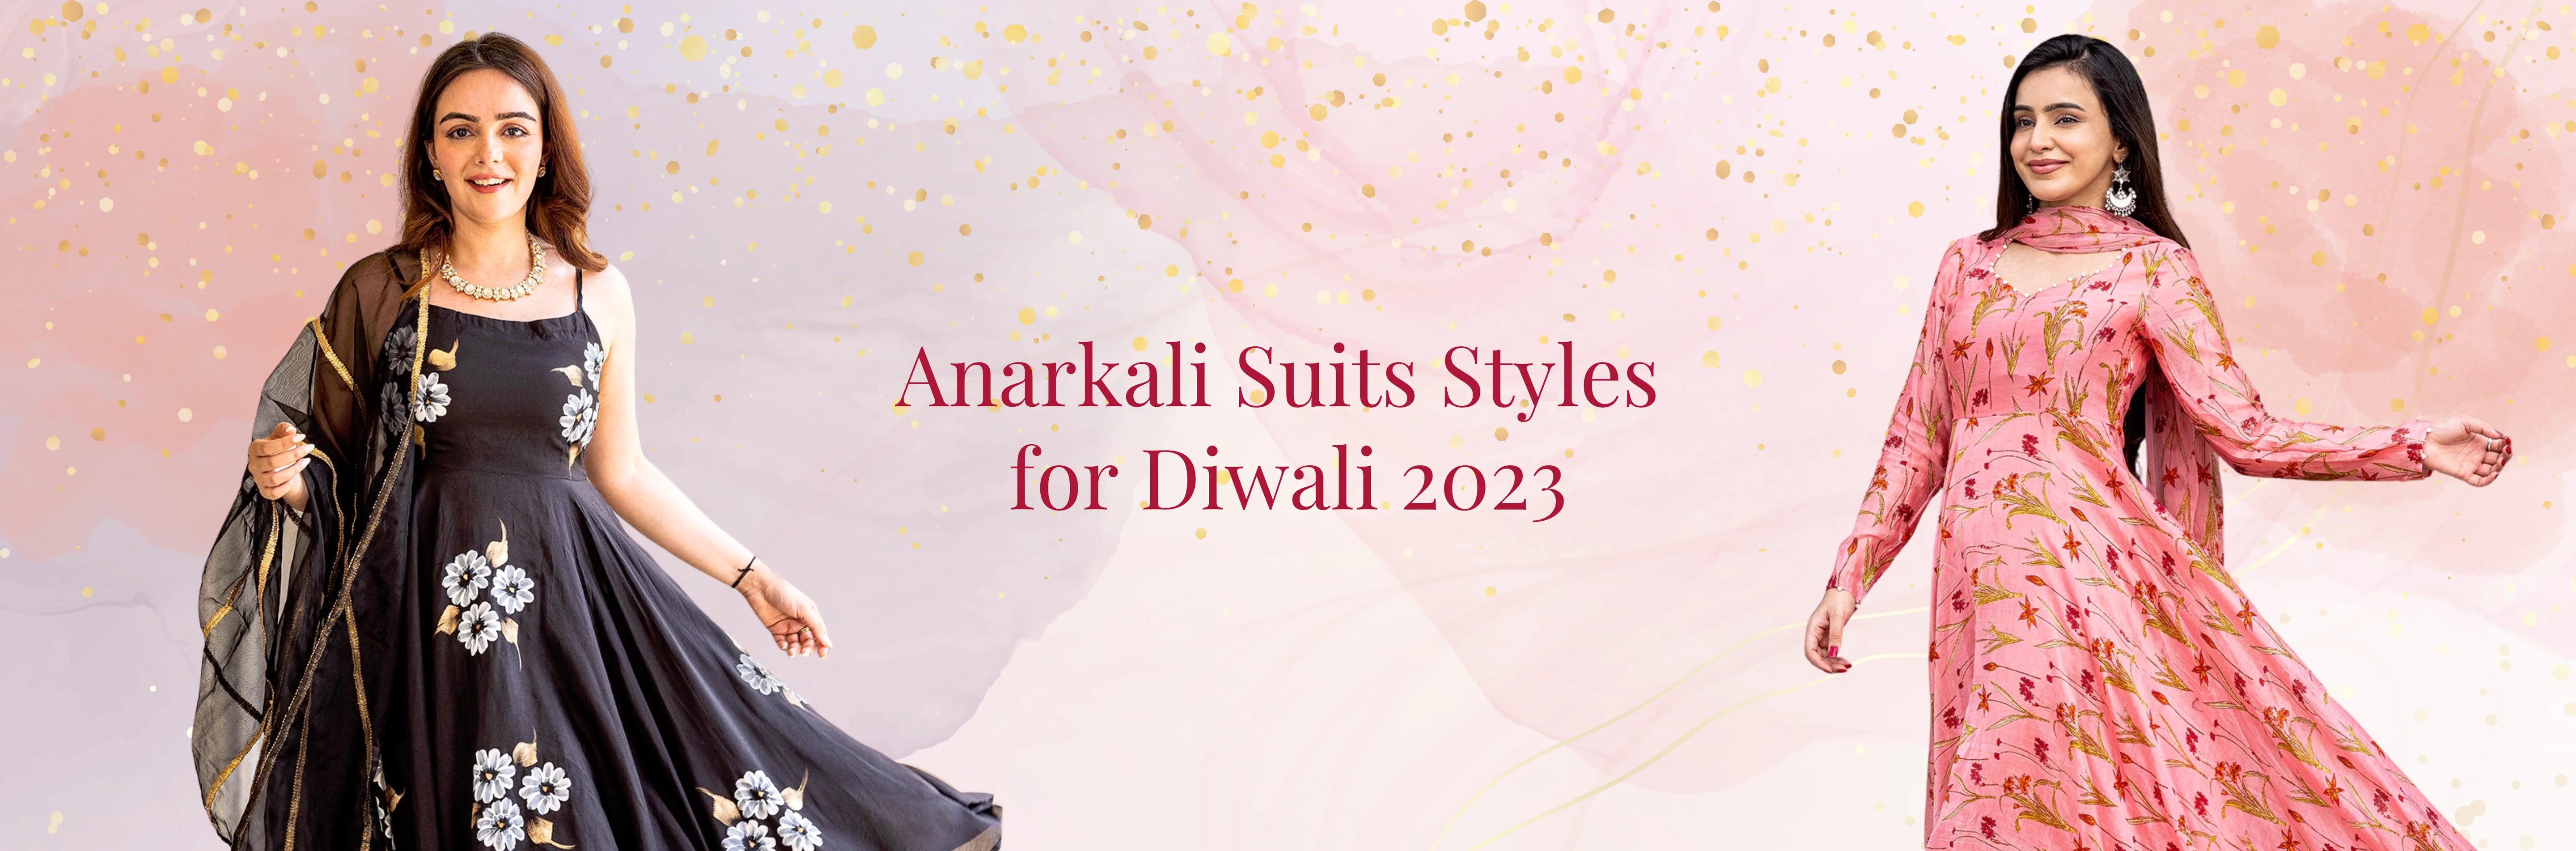 Anarkali Suits Styles for Diwali